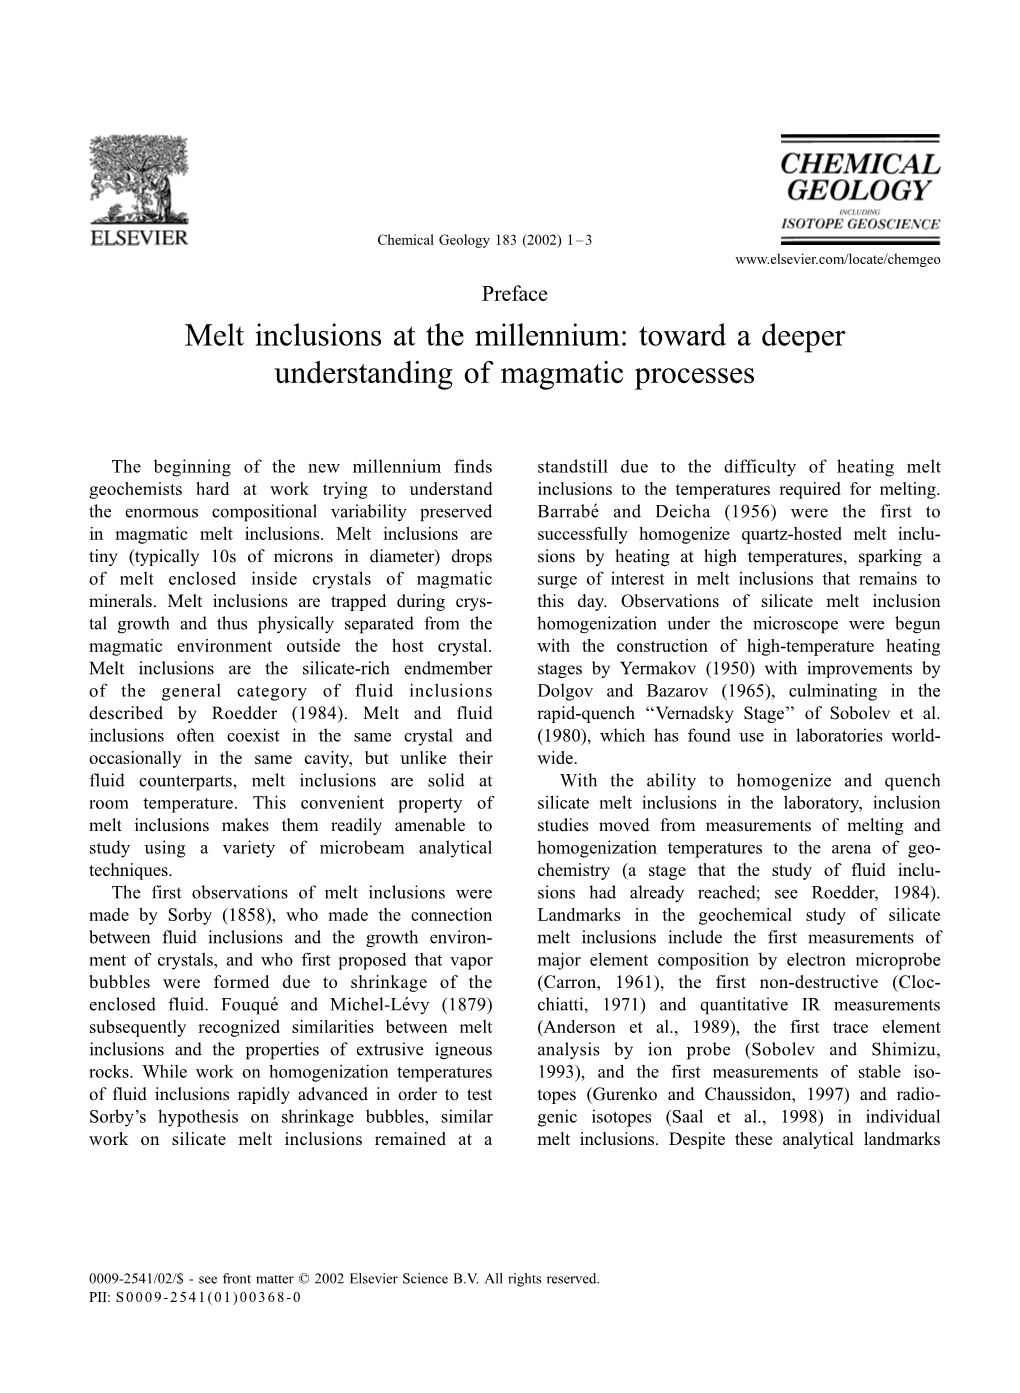 Melt Inclusions at the Millennium: Toward a Deeper Understanding of Magmatic Processes